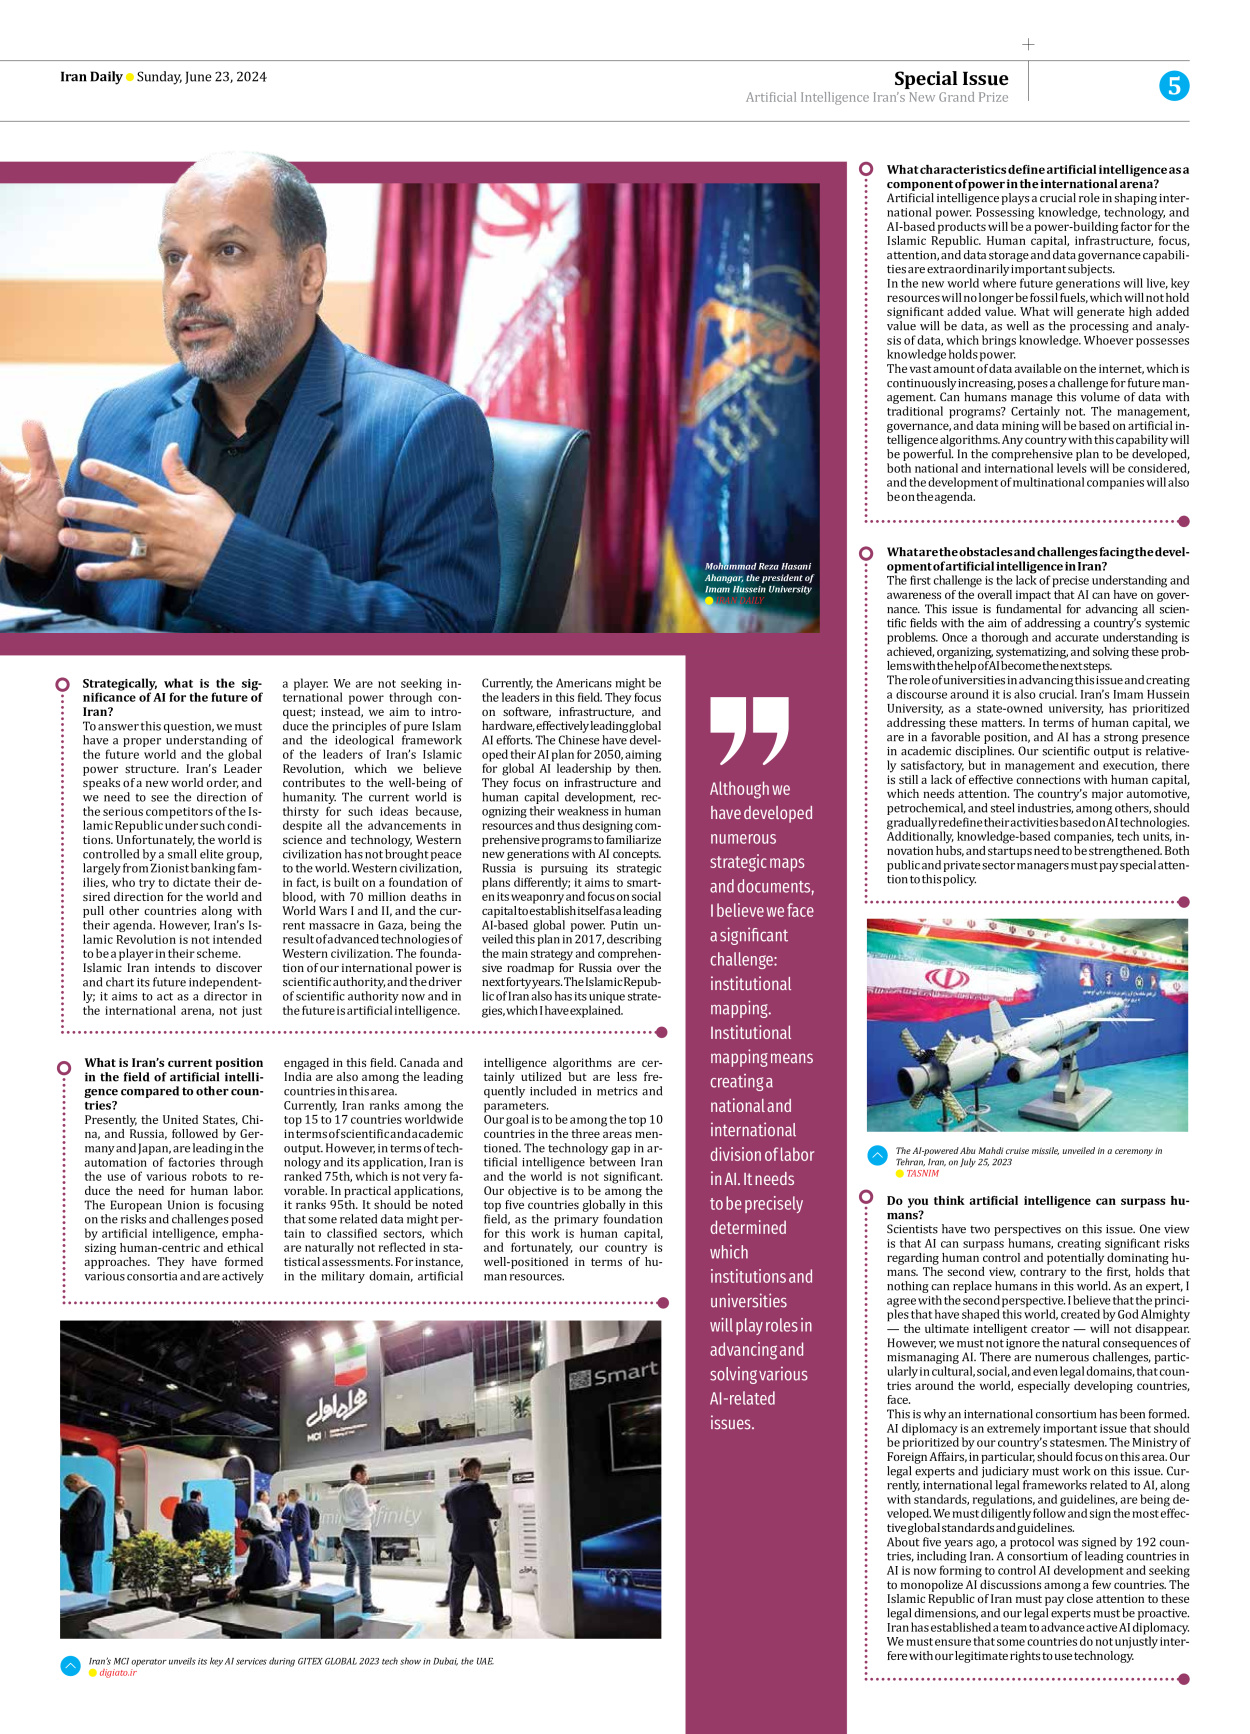 Iran Daily - Number Seven Thousand Five Hundred and Eighty Seven - 23 June 2024 - Page 5